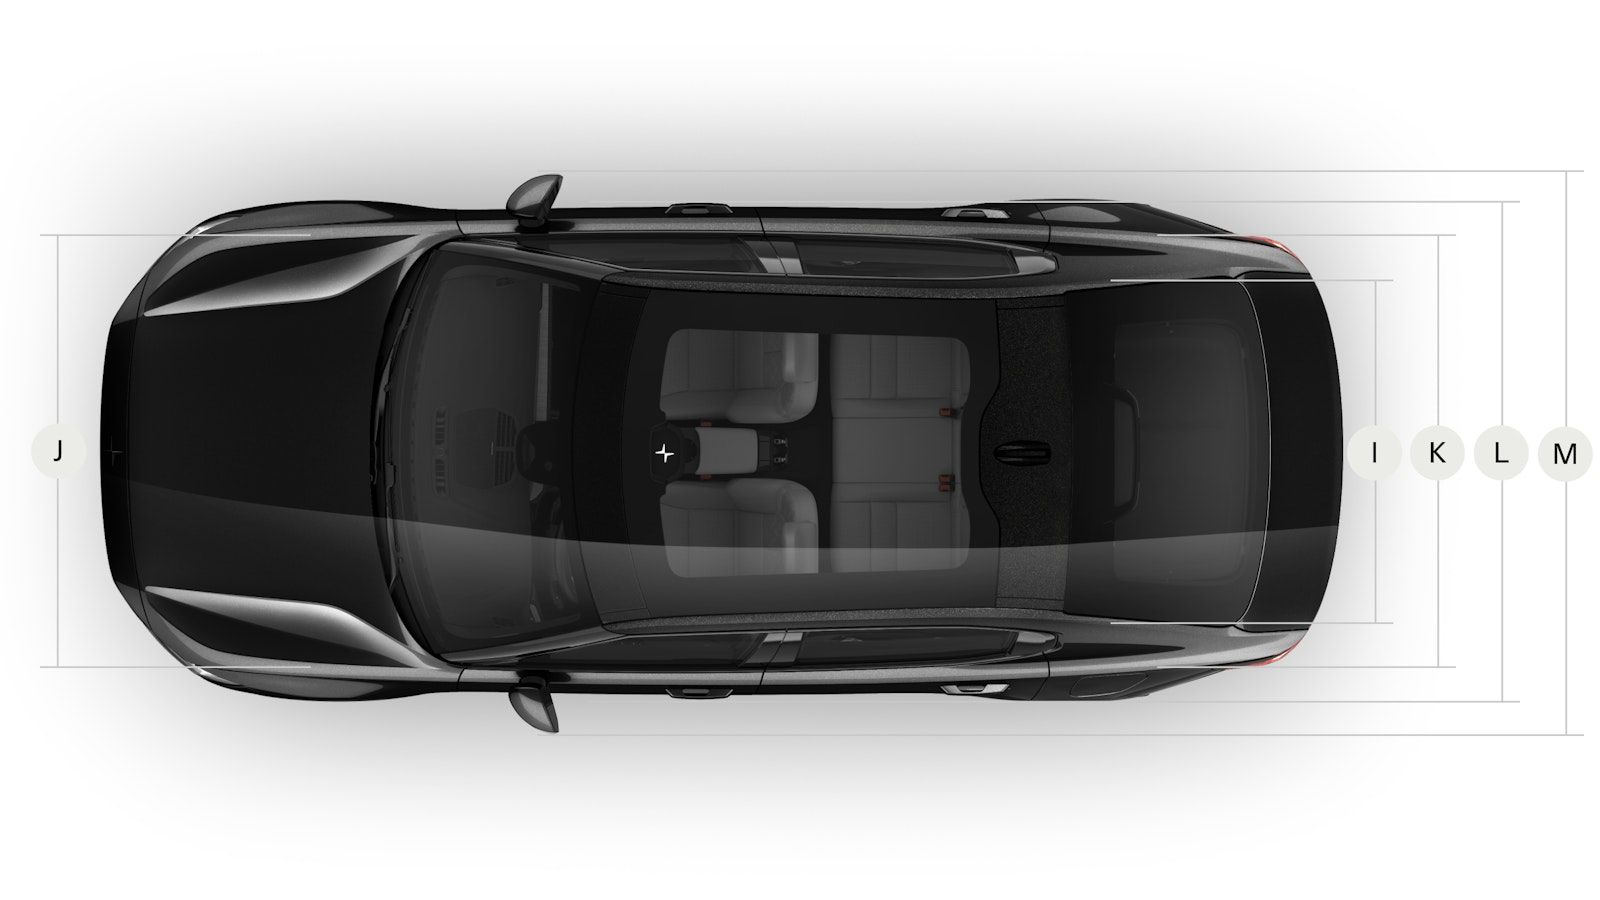 Polestar 2 showing specific metrics from above